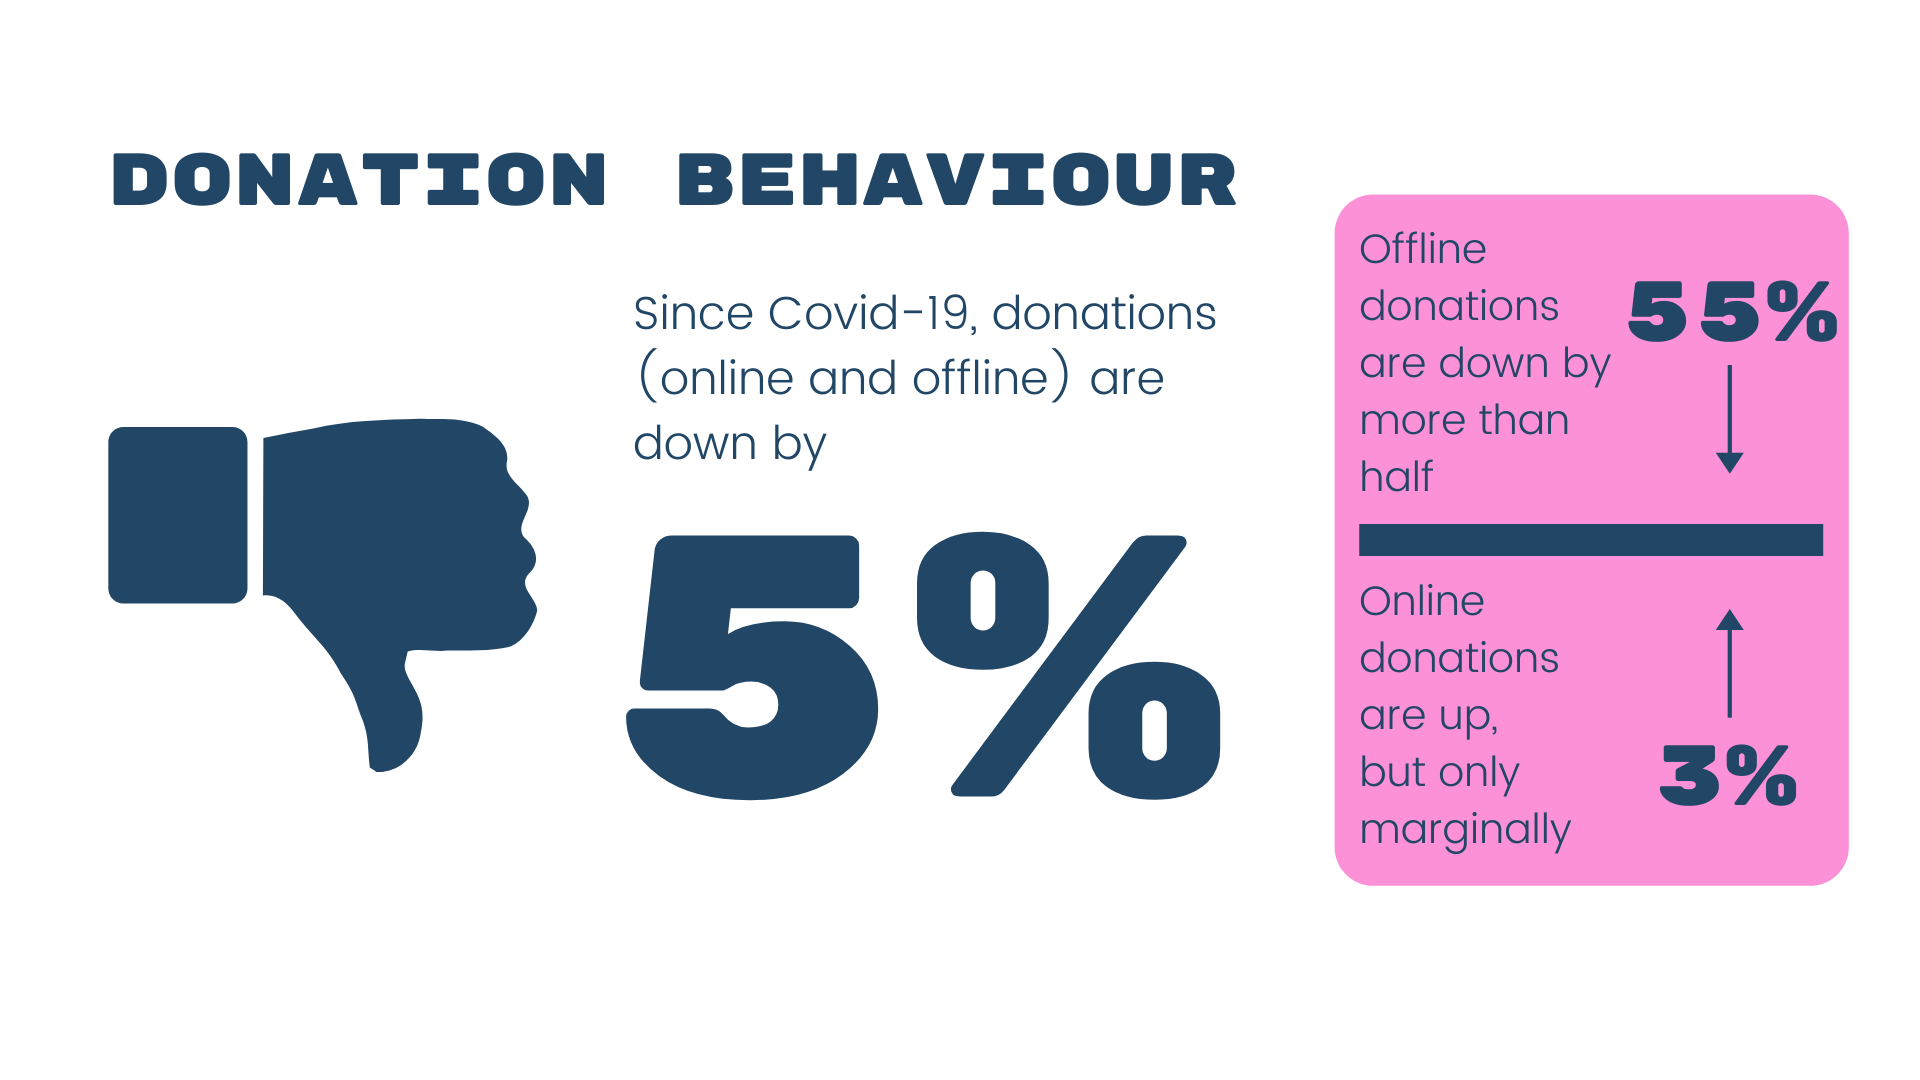 Donation behaviour: thumbs down next to text that says 'Since Covid-19, donations (online and offline) are down by 5%'. More text to the right reads 'Offline donations are down by more than half - 55%' and 'Online donations are up, but only marginally - 3%'